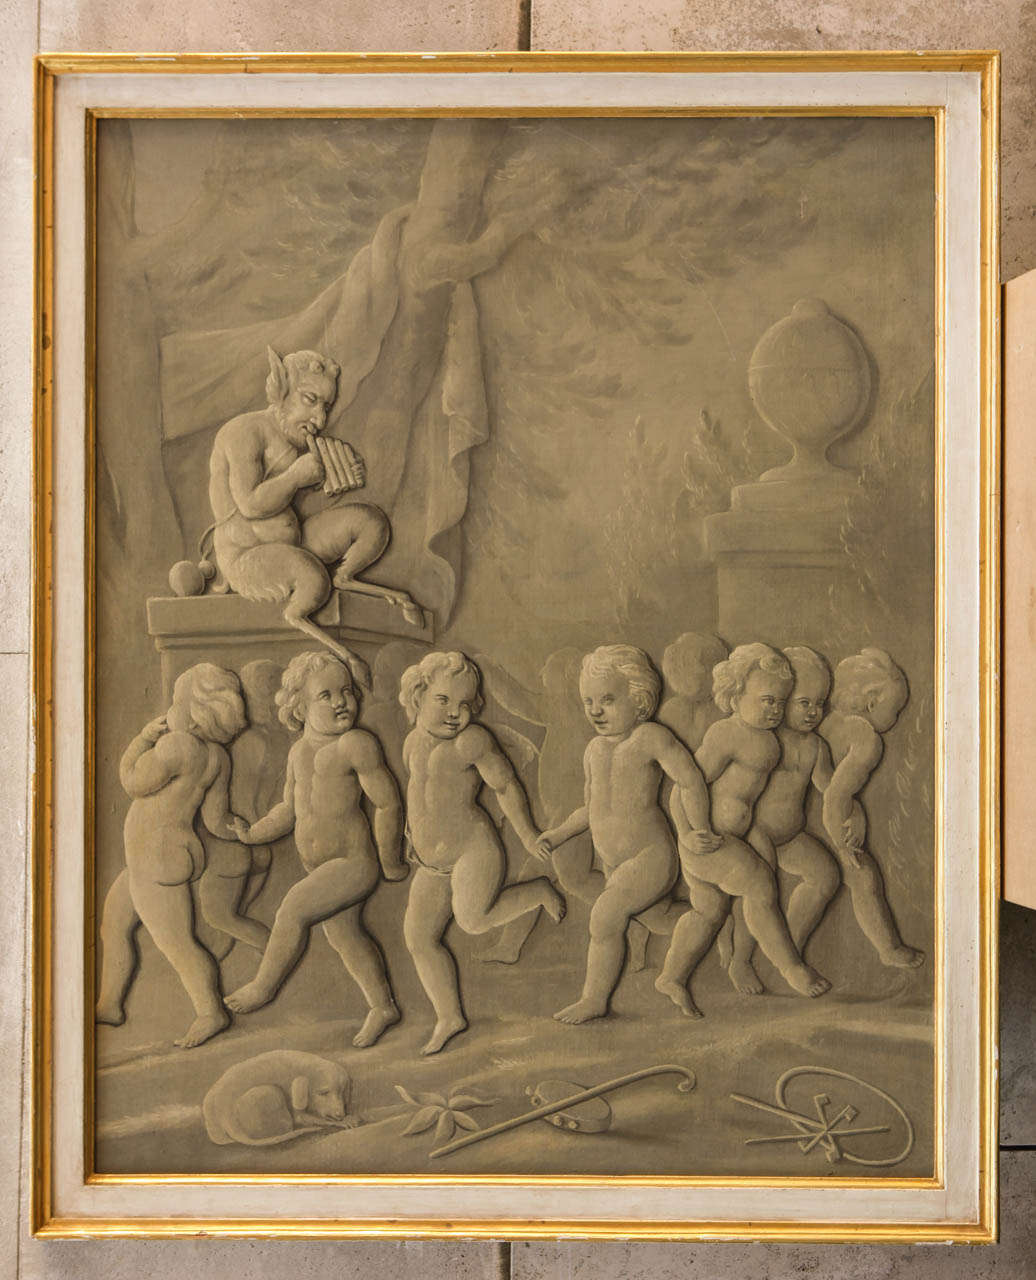 Late 18th century French Grisaille Painting, oil on canvas.
Mythological scene with the Greek God Pan and dancing putto figures with ivory painted and parcel gilt frame.
cm 165x135 with frame